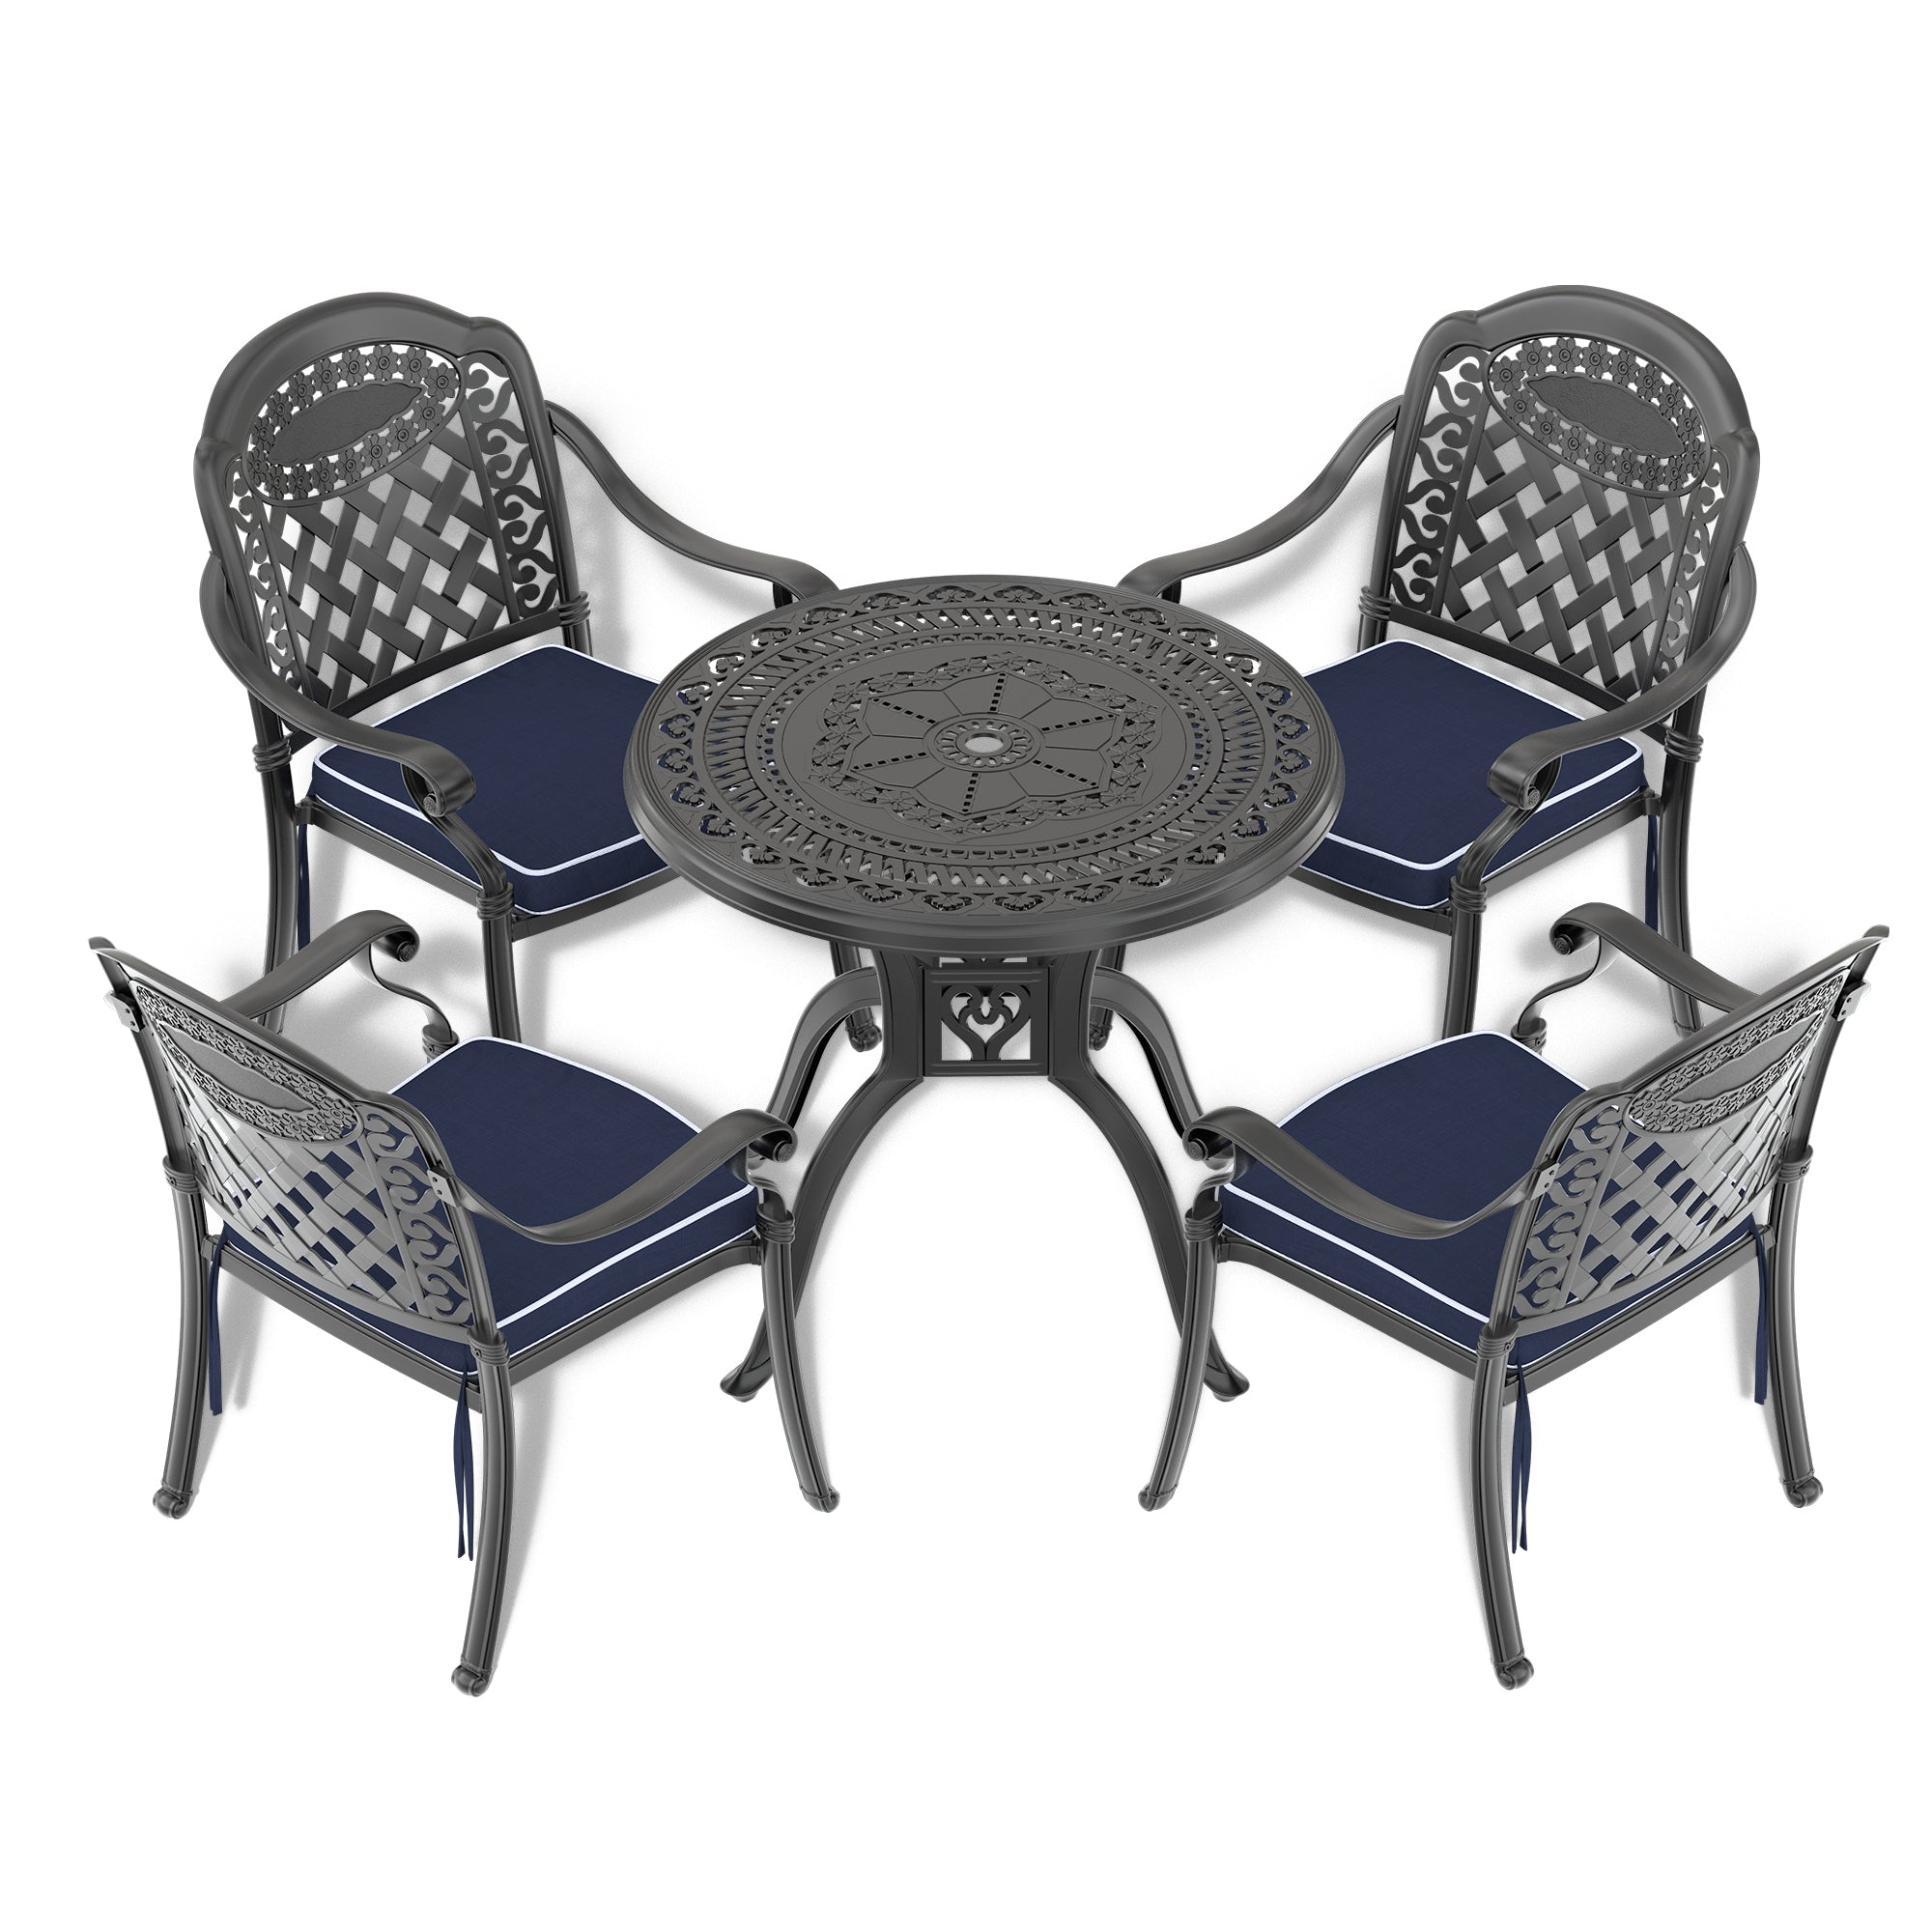 31.50 inch Cast Aluminum Patio Dining Table with Black yes-complete patio set-black-weather resistant